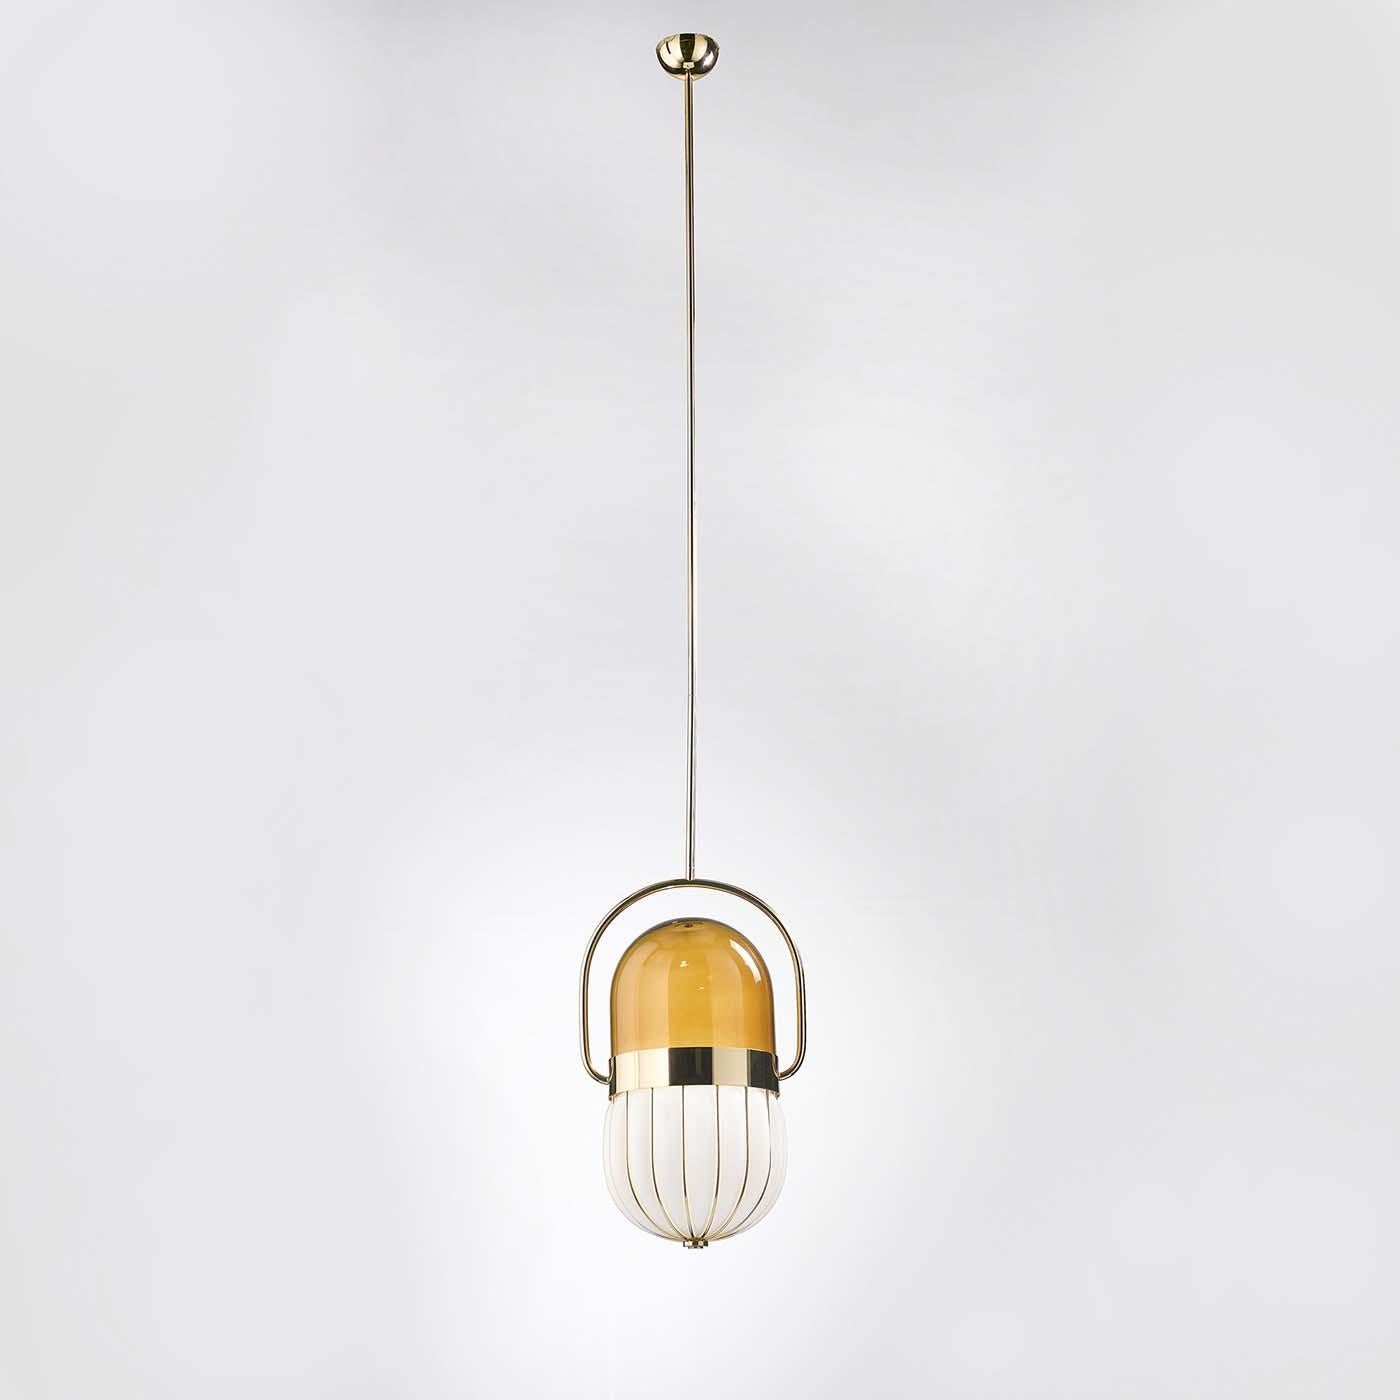 Part of a collection designed by Matteo Zorzenoni and aptly named for its curved Silhouette that resembles a pill, this elegant two-light ceiling lamp was crafted using centuries-old Murano craftsmanship, with glass mouth-blown directly into the